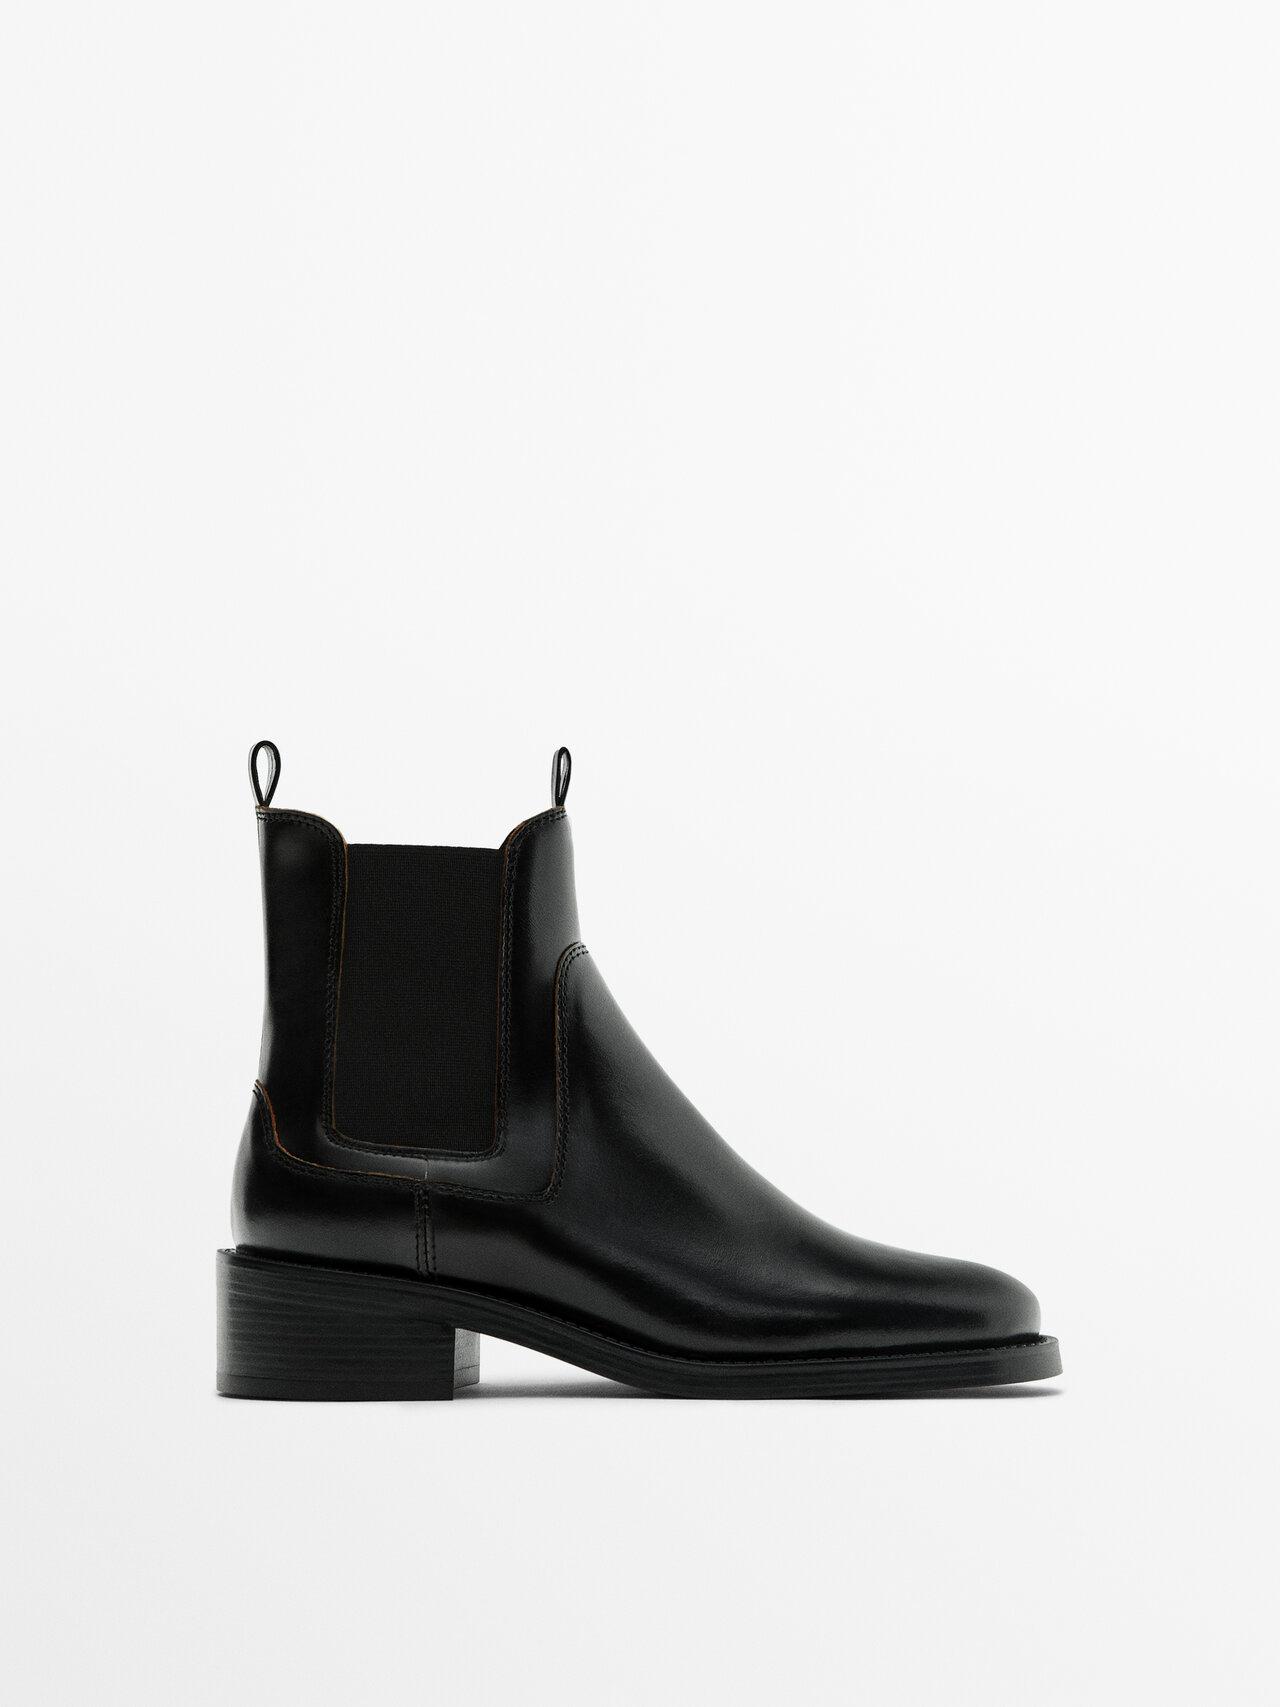 MASSIMO DUTTI Chelsea Boots With Contrast Edges in Black | Lyst